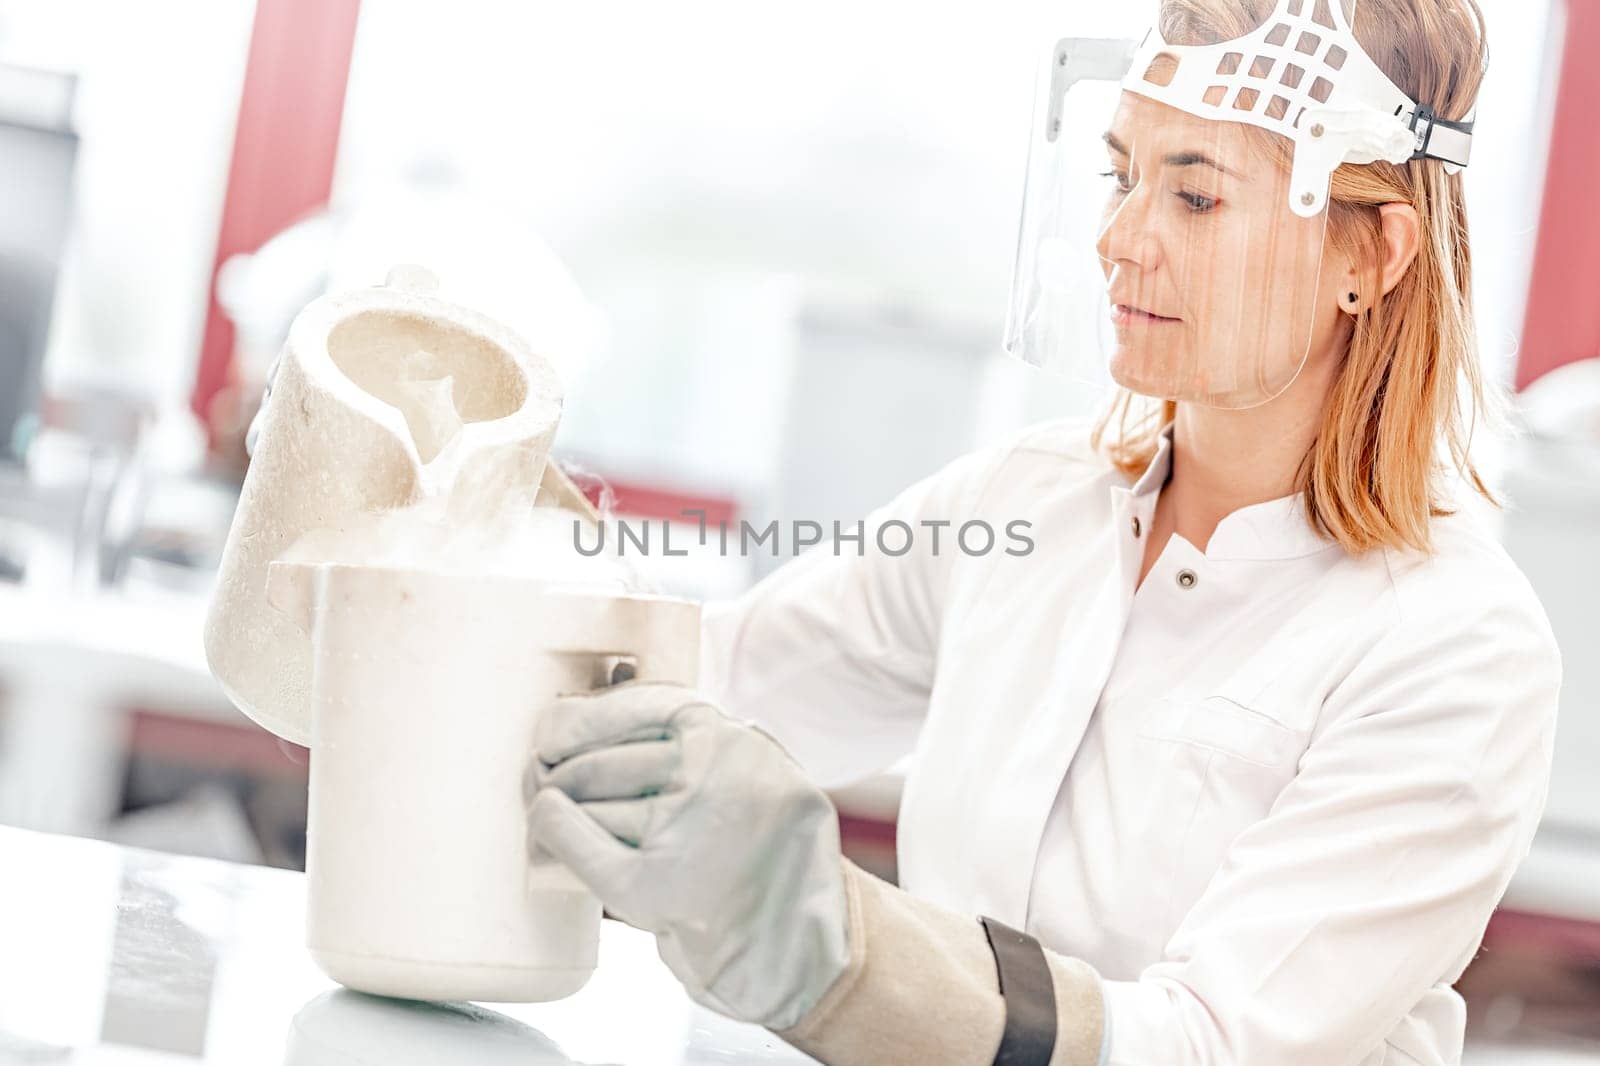 research with liquid nitrogen in the laboratory is carried out by a young female scientist with a protective glass face mask by Edophoto